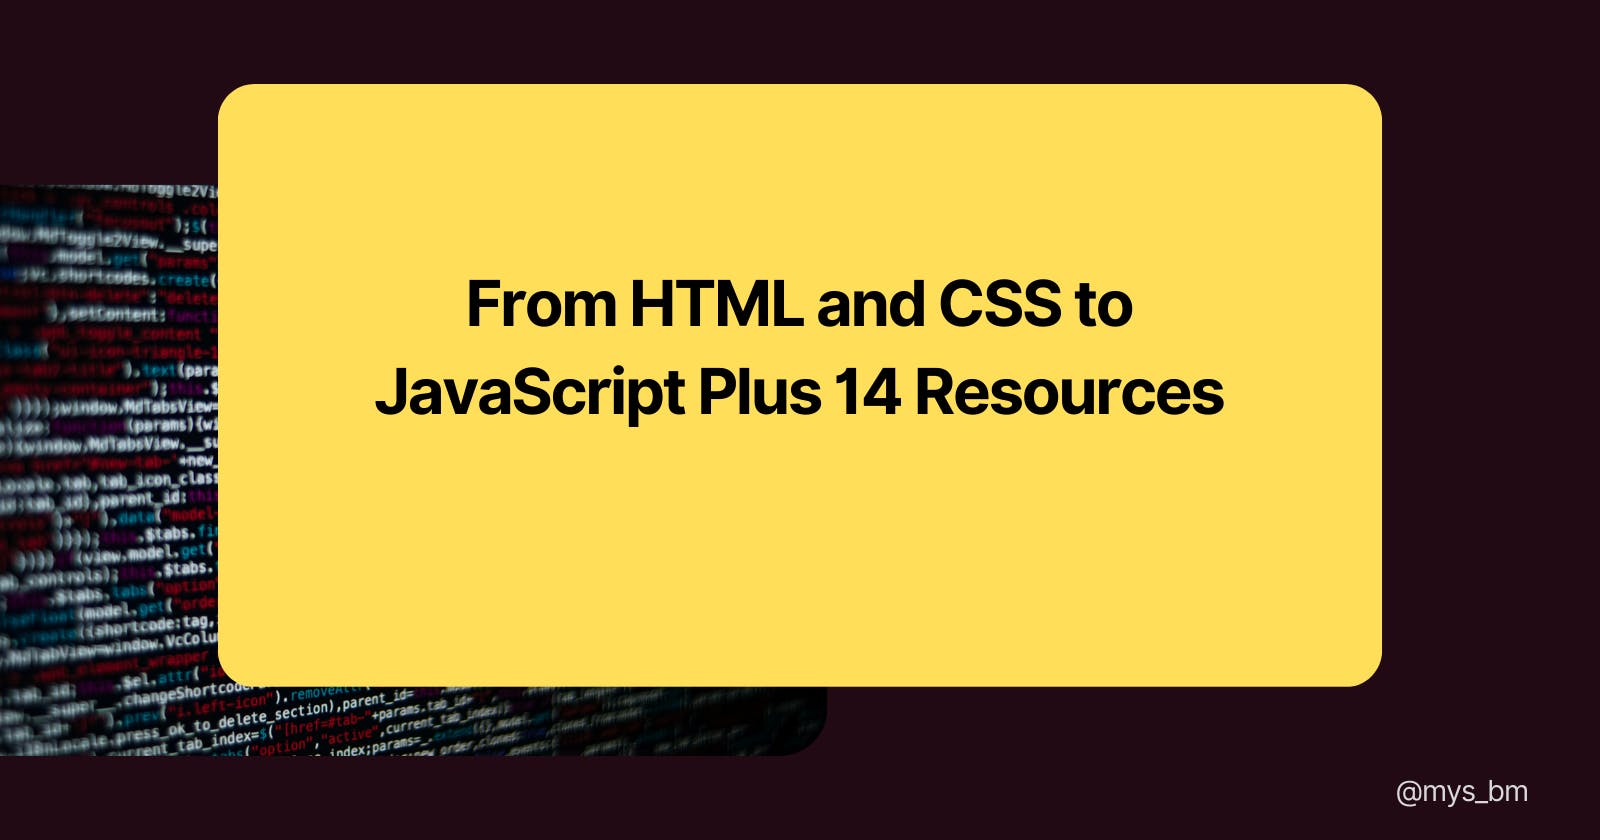 Transitioning from HTML and CSS to JavaScript Plus 14 Resources